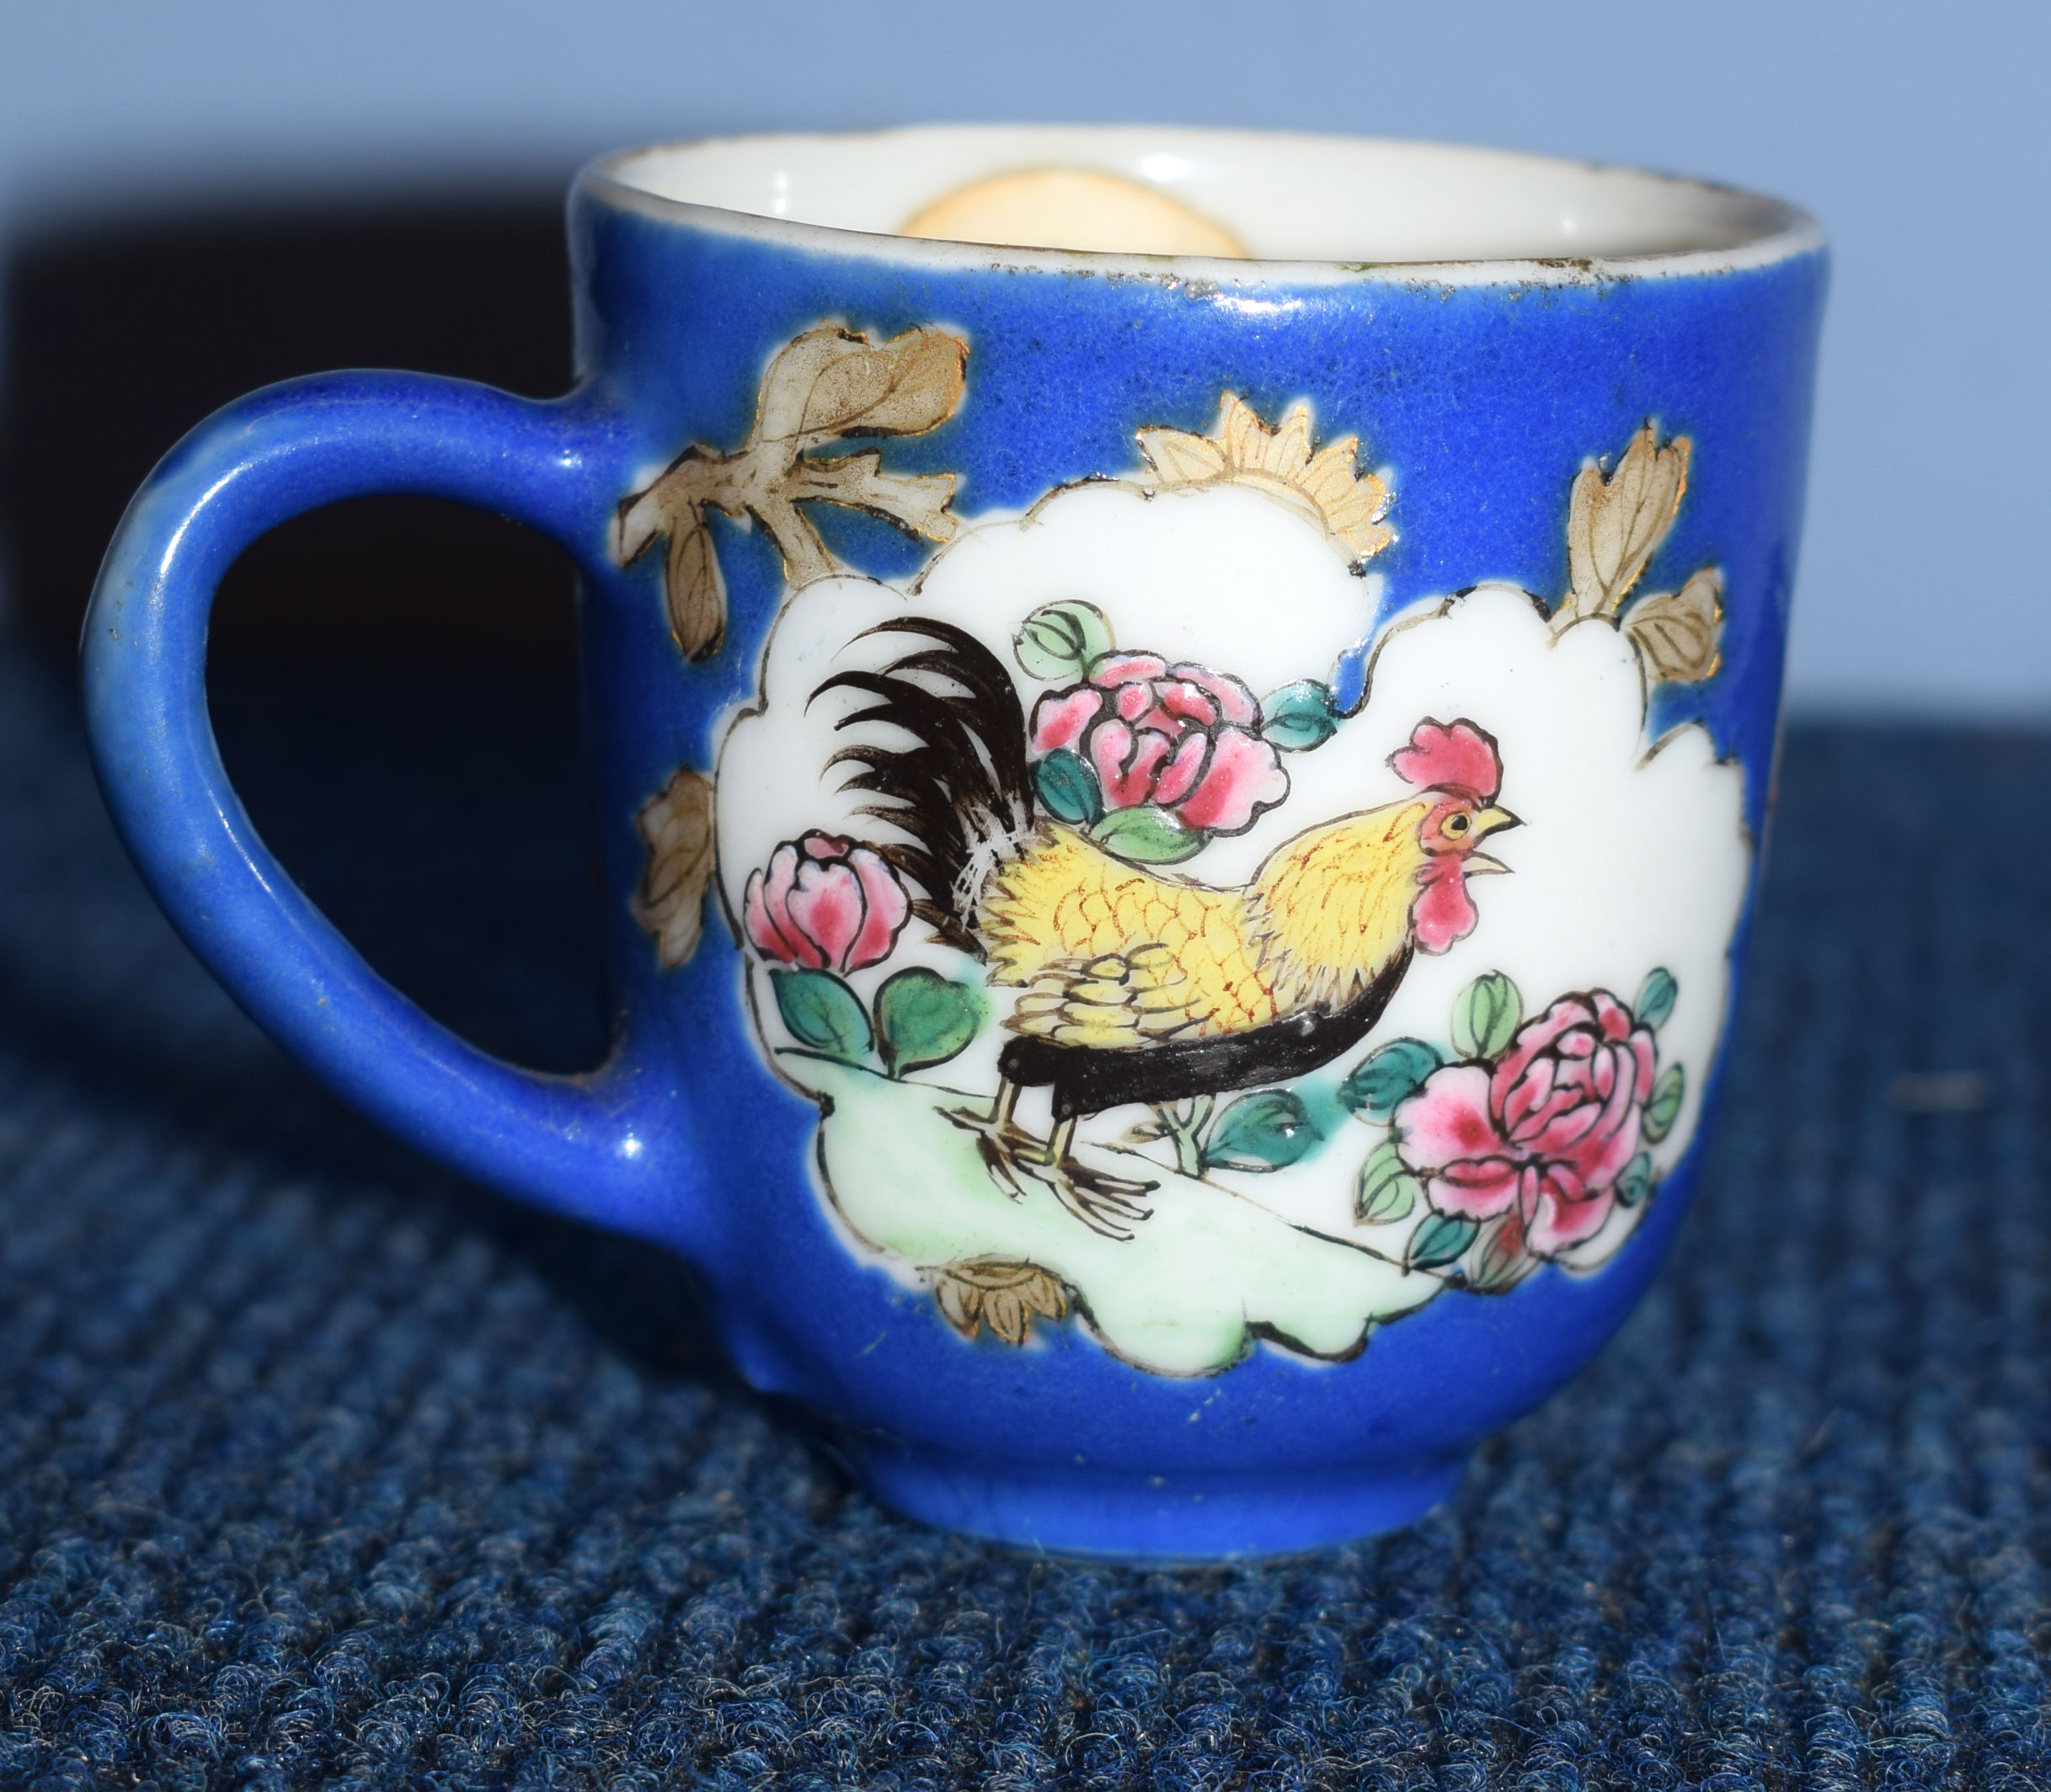 18th century Chinese porcelain cup, the gros bleu ground with vignettes of a chicken and a dog - Image 2 of 2